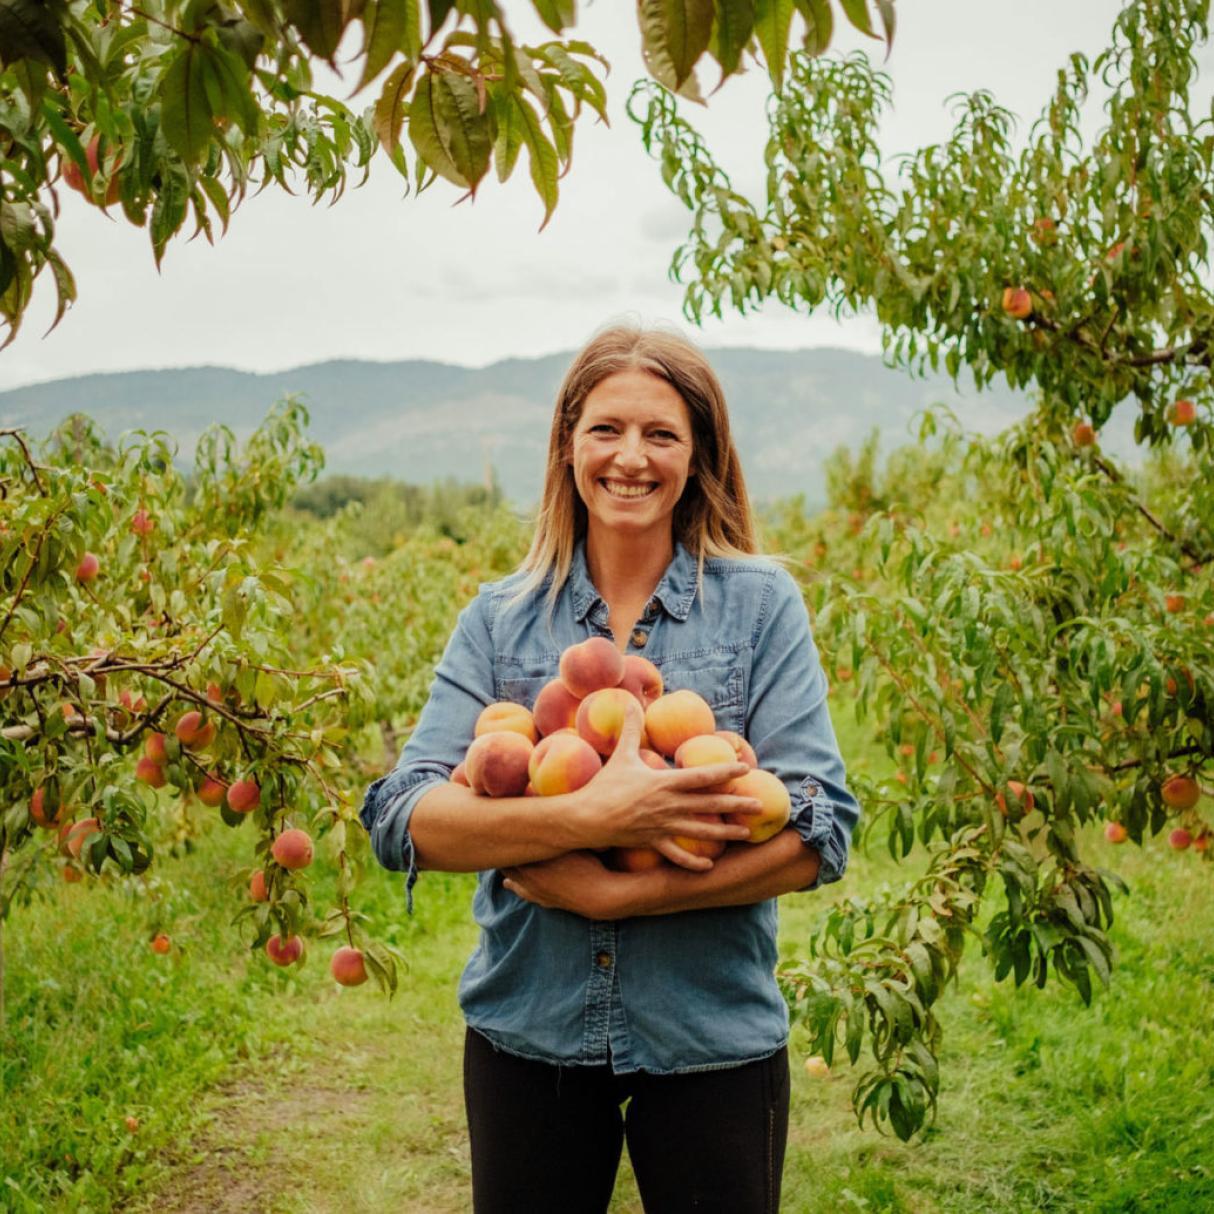 A woman holding peaches in an orchard.